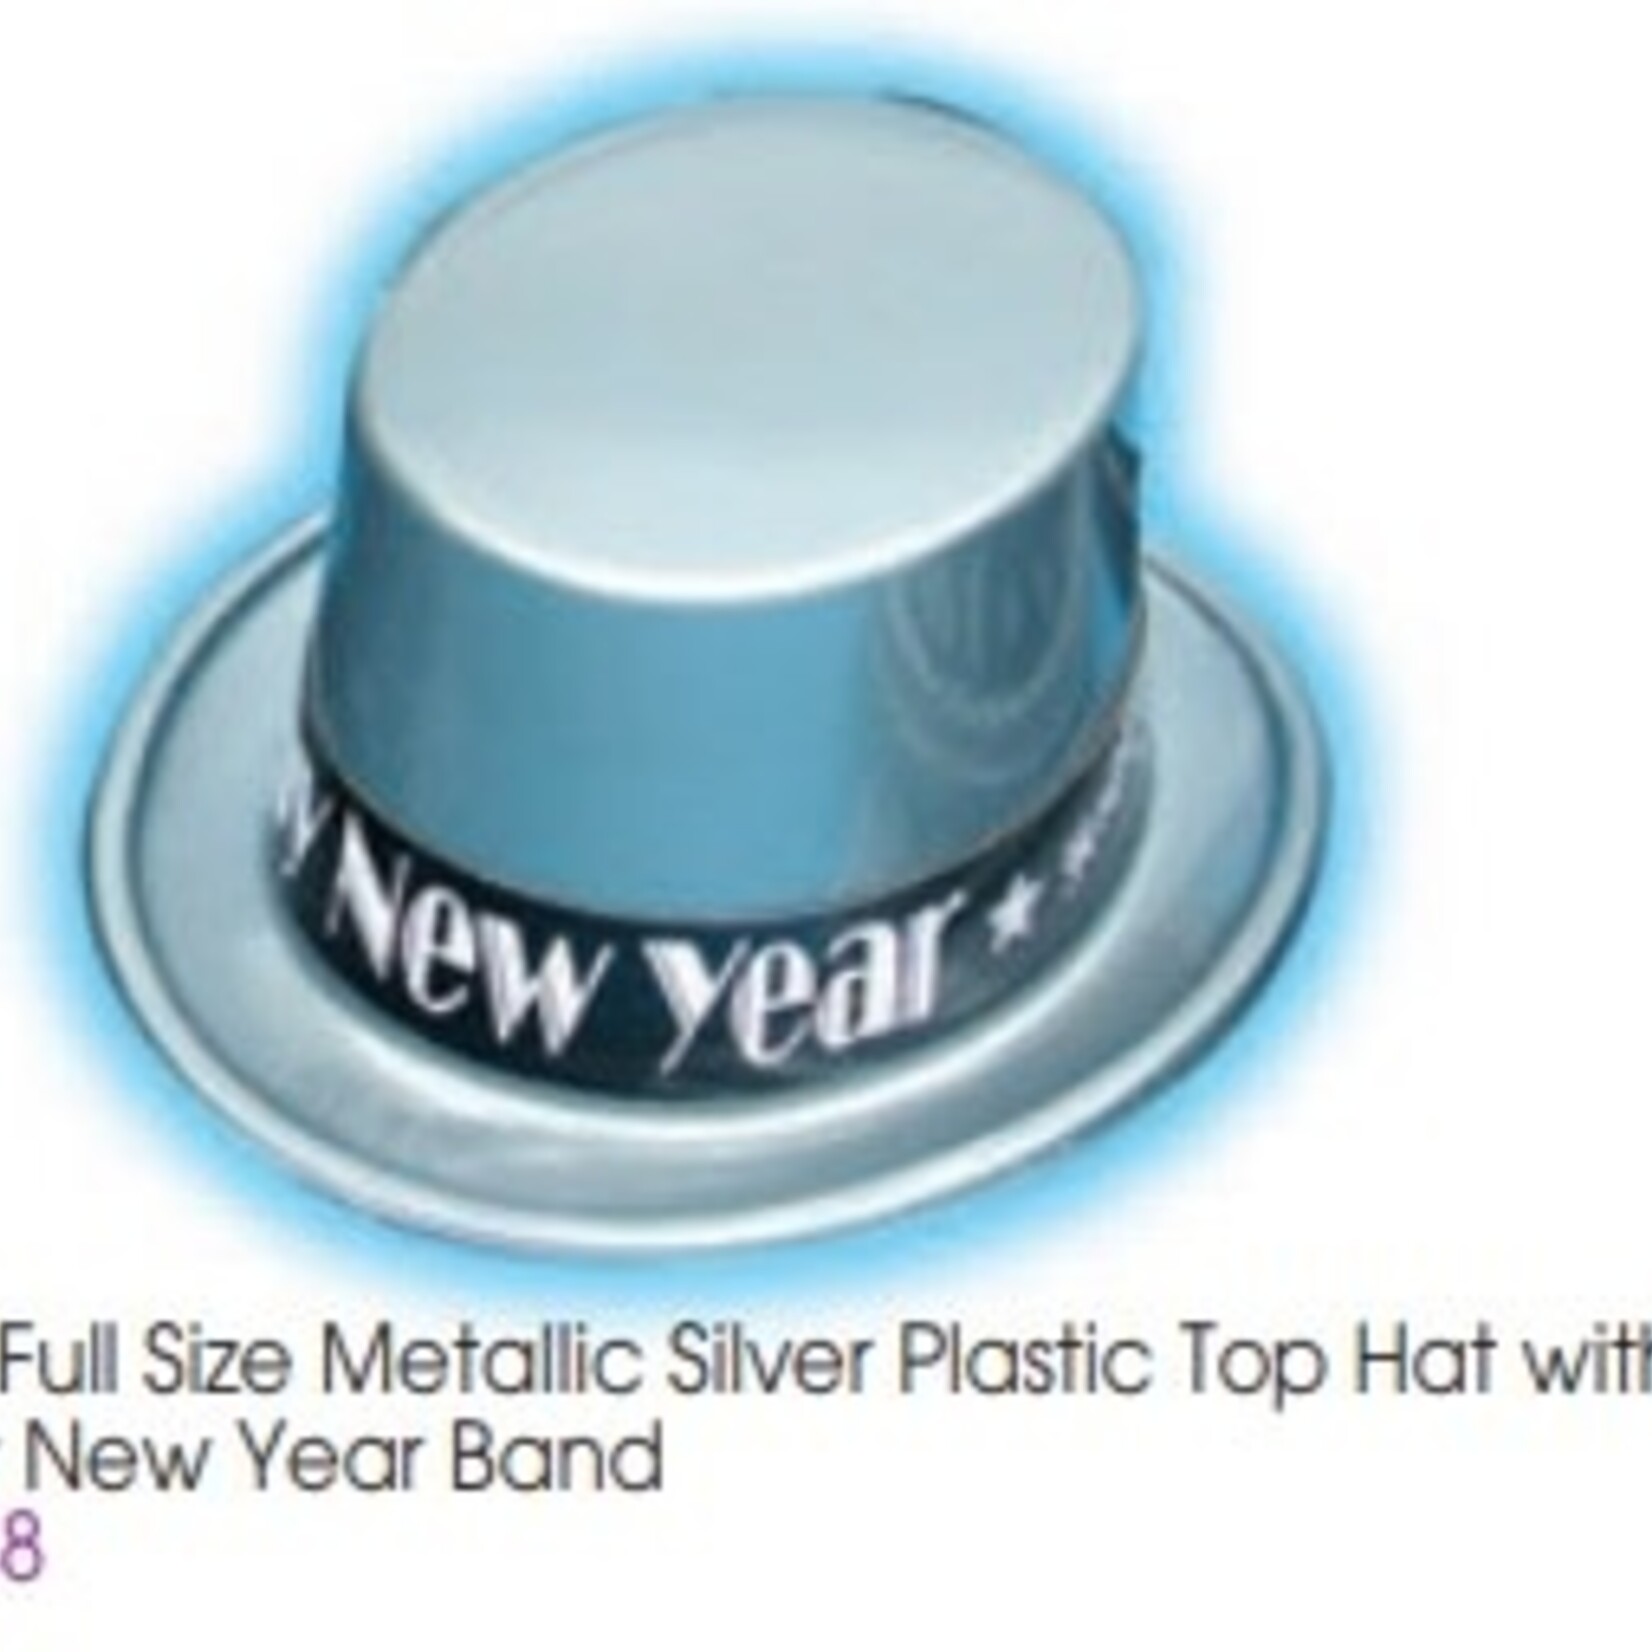 Metallic Silver Plastic Top Hat with New Year Band